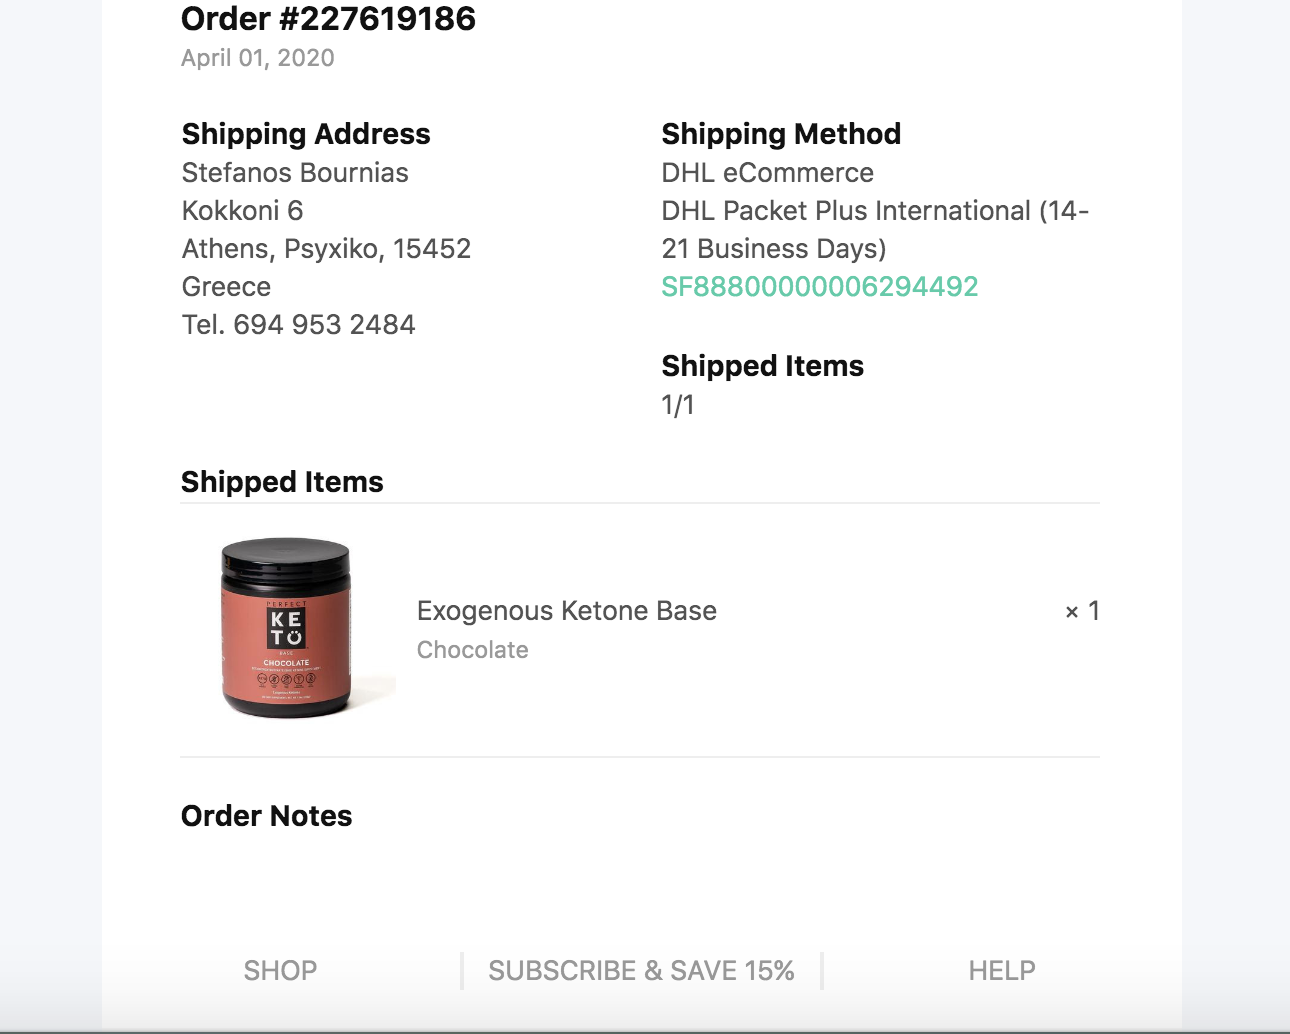 Order confirmation by Perfect Keto